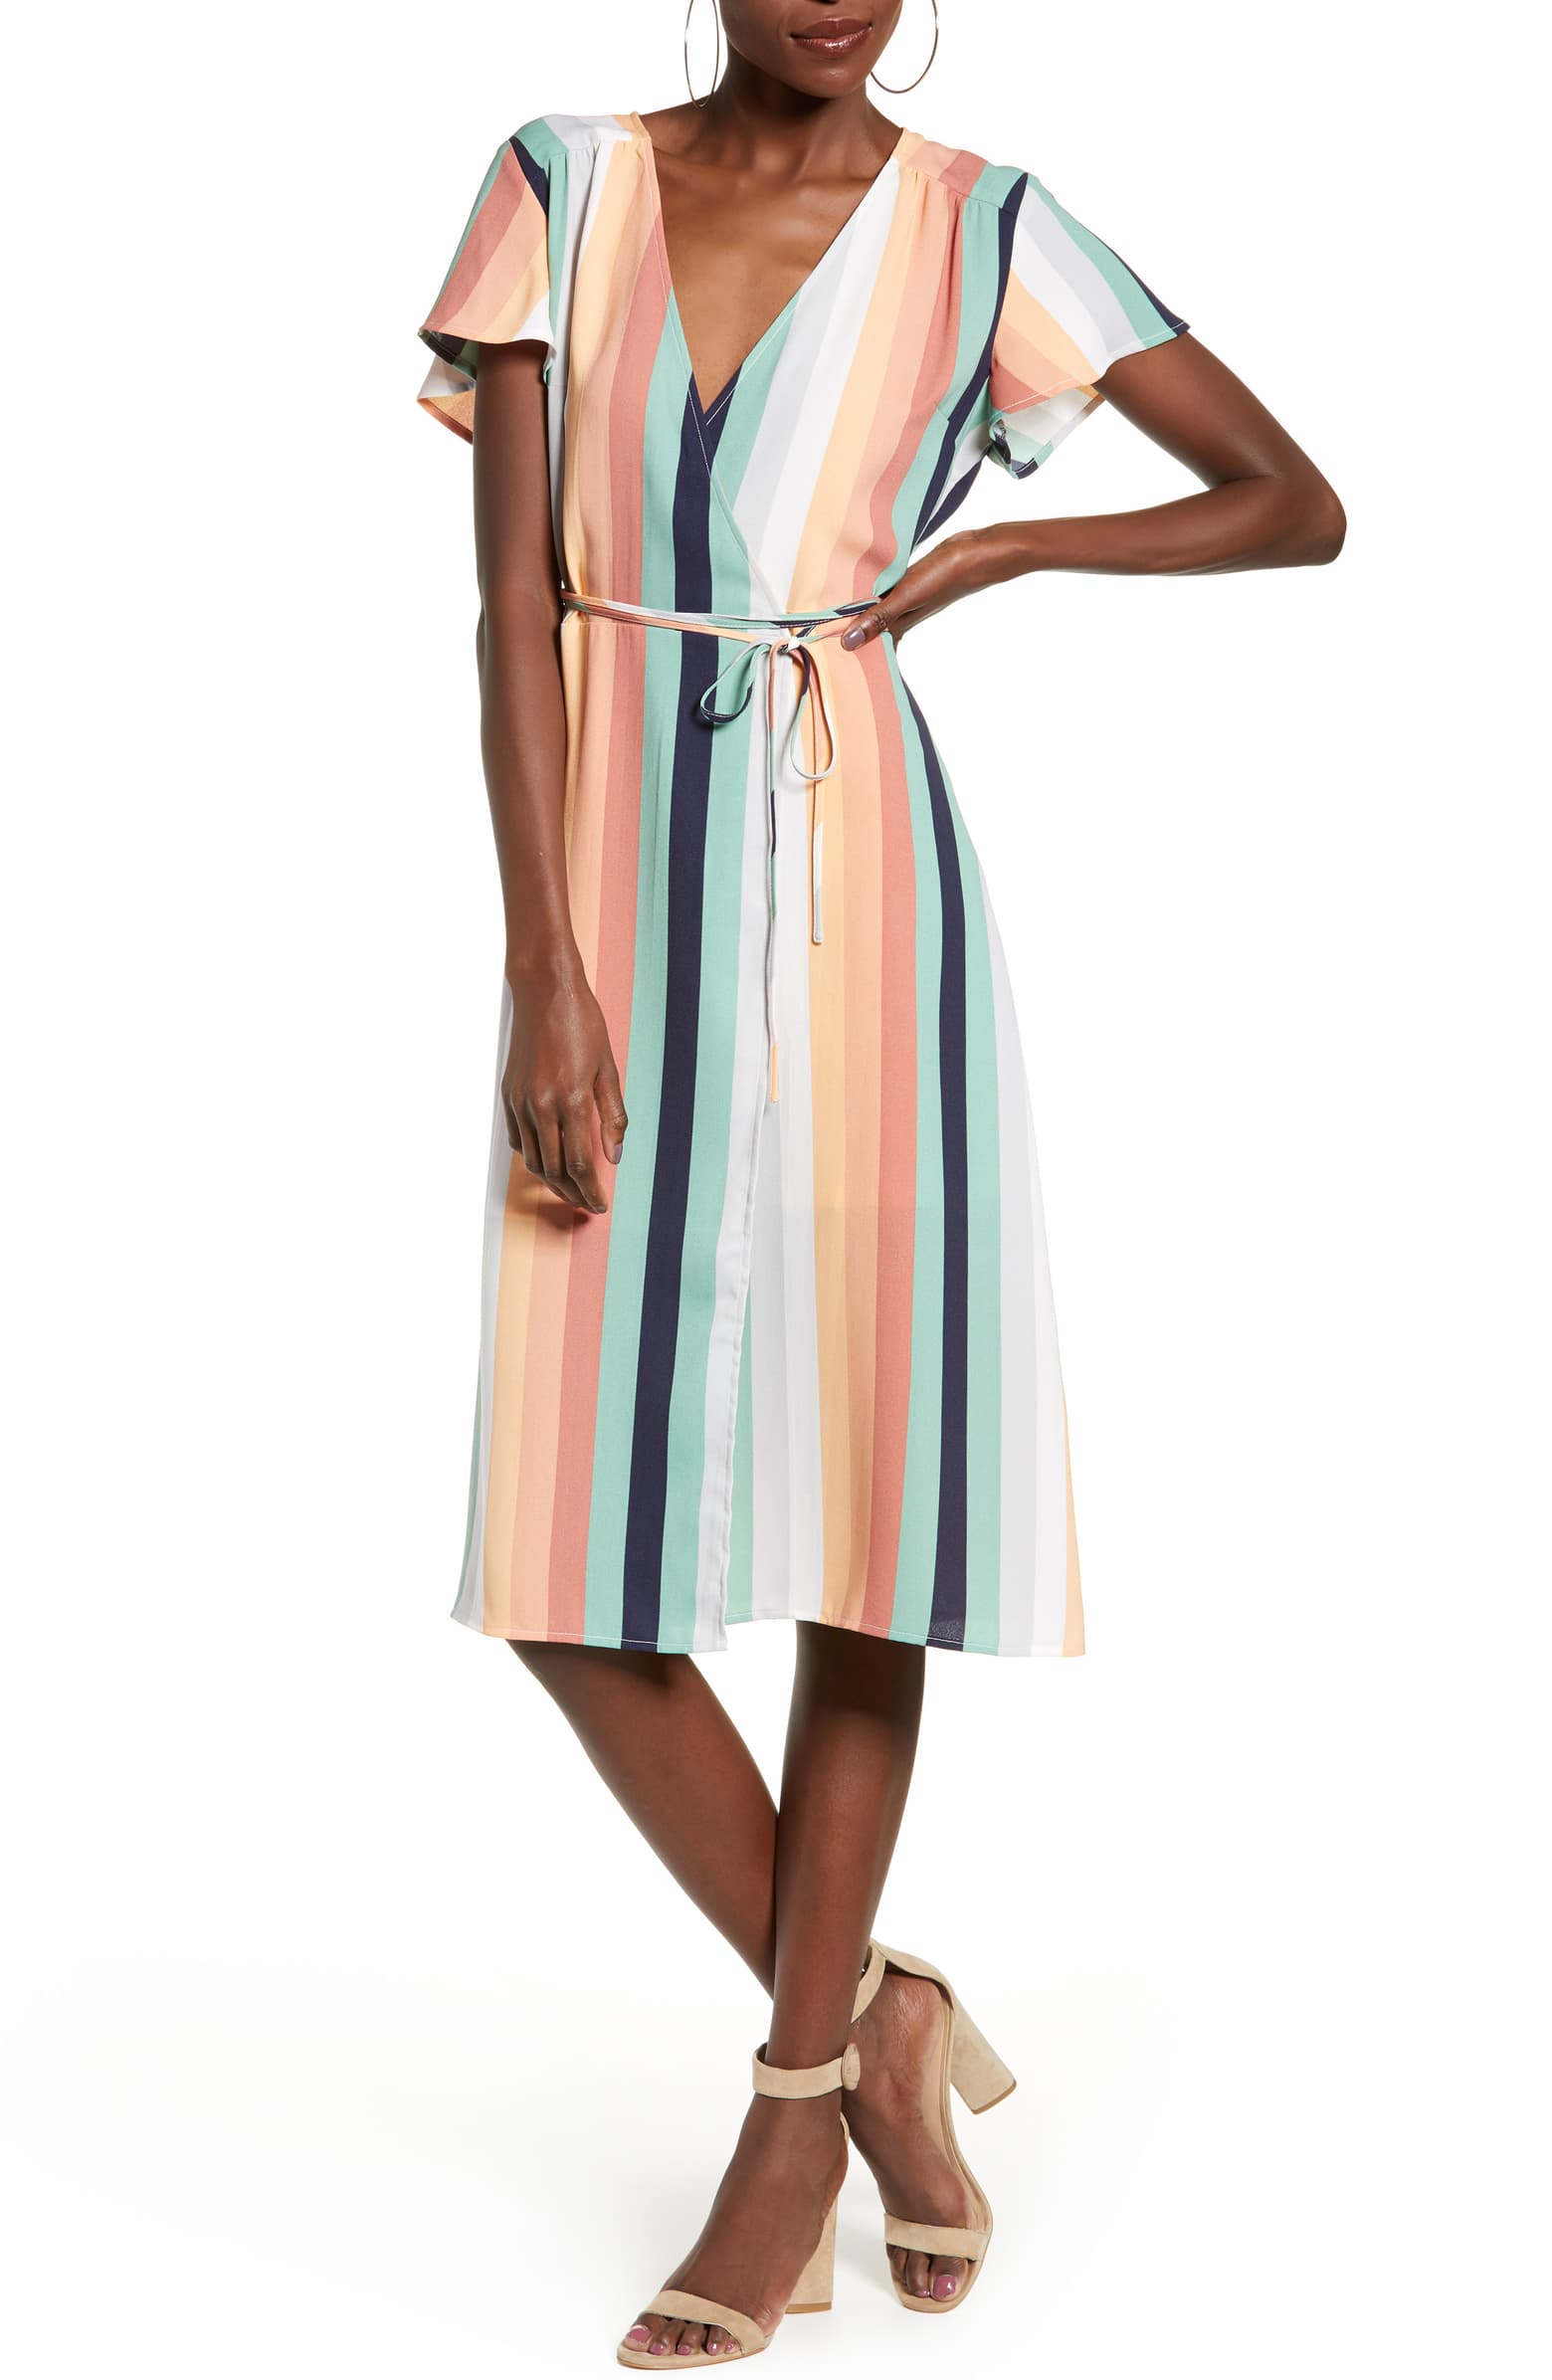 This Wrap Dress Is So Flattering On Every Body Type–Get Yours While It ...